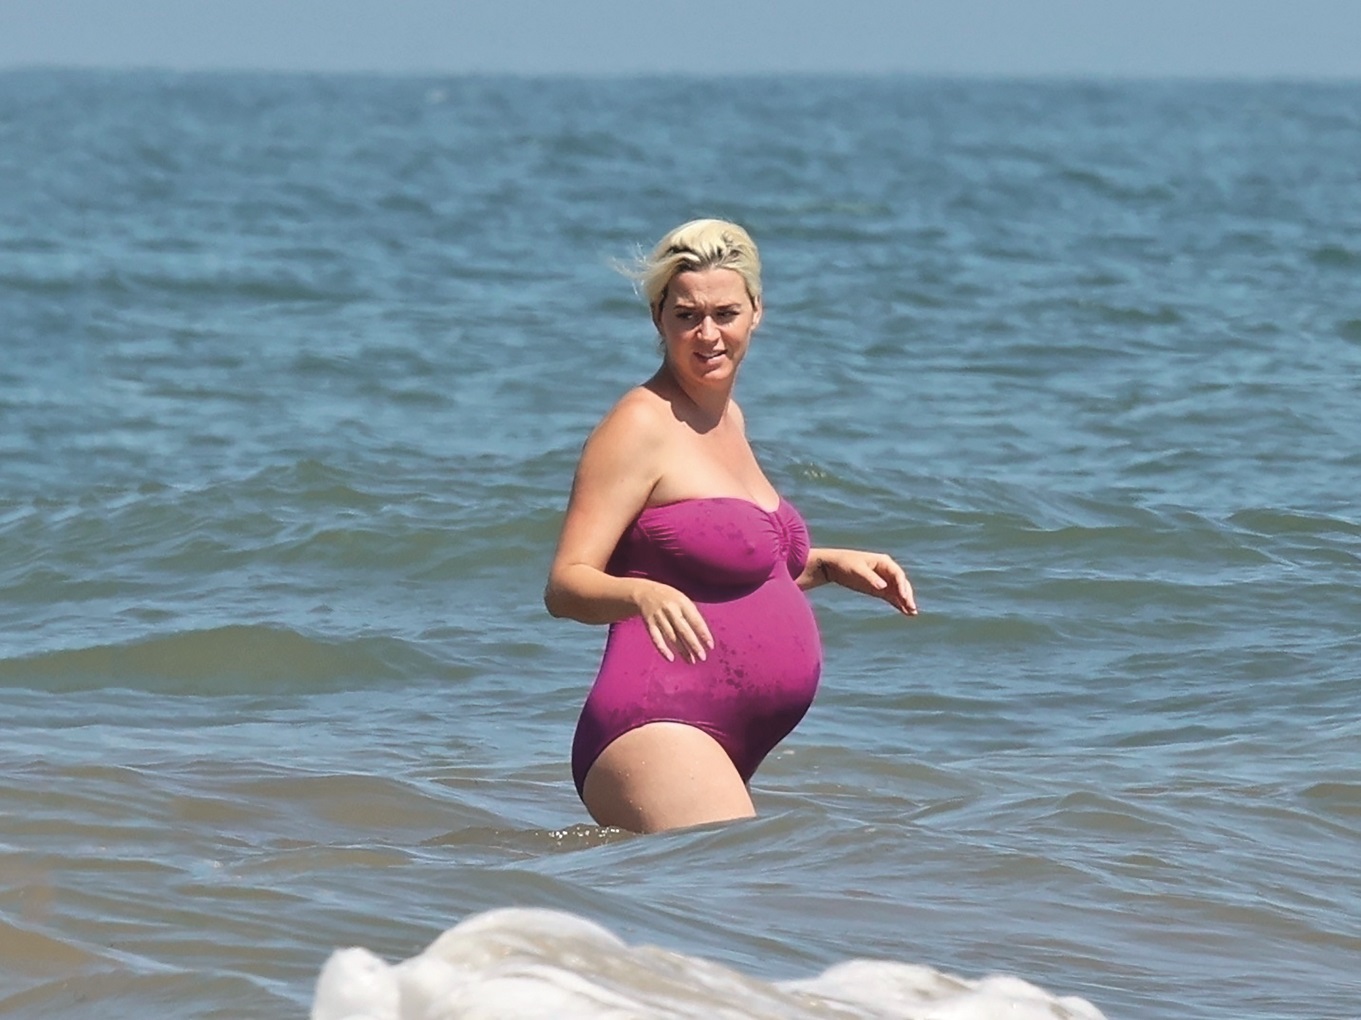 Malibu, CA  - *PREMIUM-EXCLUSIVE*  - *WEB EMBARGO UNTIL 9 AM PDT ON JULY 14, 2020* The Roar singer who’s expecting her first child in August, waded in to cool off in the ocean with her pregnant friend as temperatures soared in Southern California.

*UK Clients - Pictures Containing Children
Please Pixelate Face Prior To Publication*,Image: 542496546, License: Rights-managed, Restrictions: RIGHTS: WORLDWIDE EXCEPT IN UNITED KINGDOM, Model Release: no, Credit line: Clint Brewer Photography / BACKGRID / Backgrid USA / Profimedia